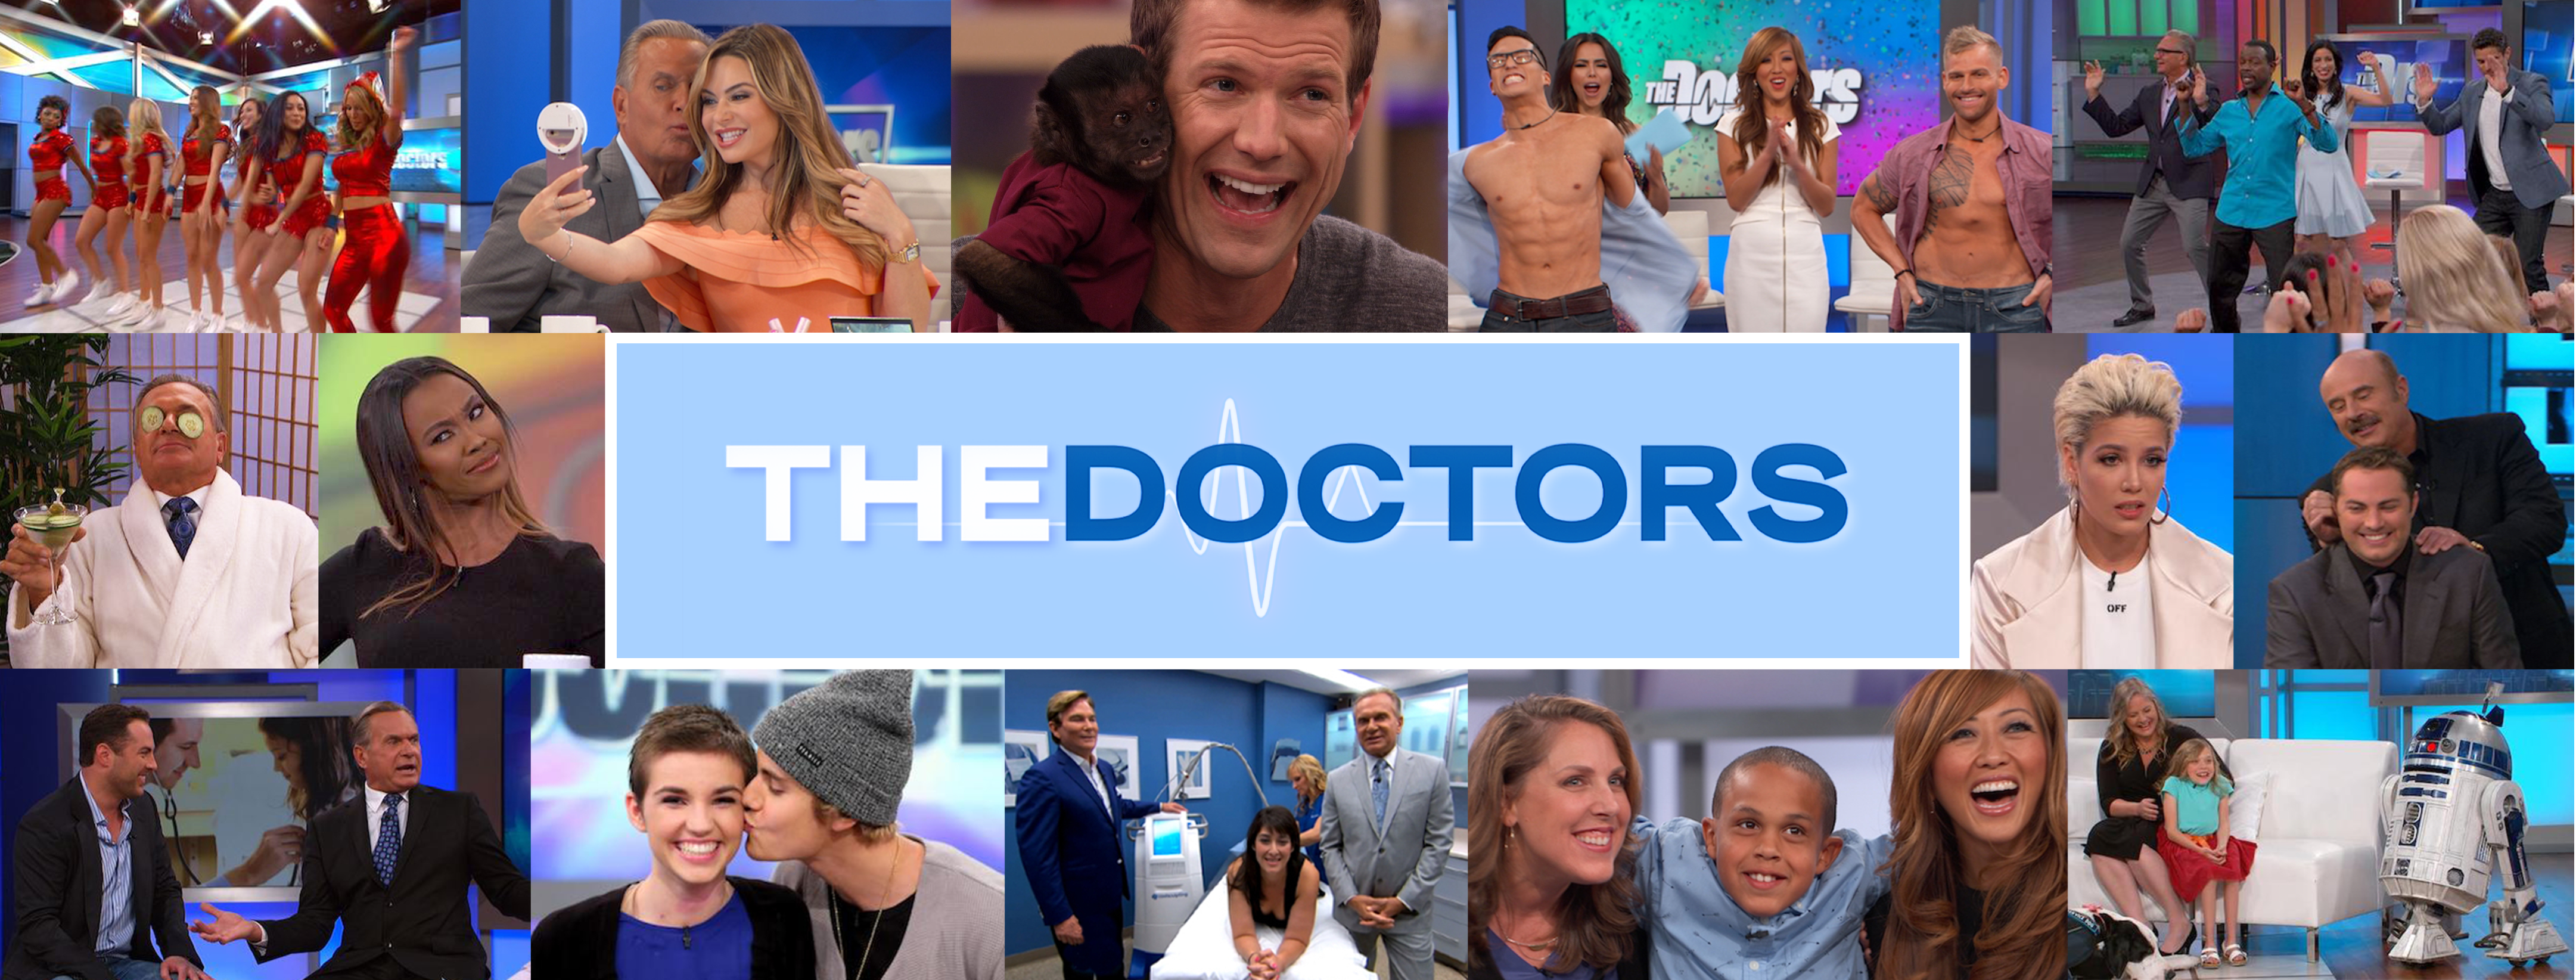 Dr. Jessica O'Reilly and the doctors 